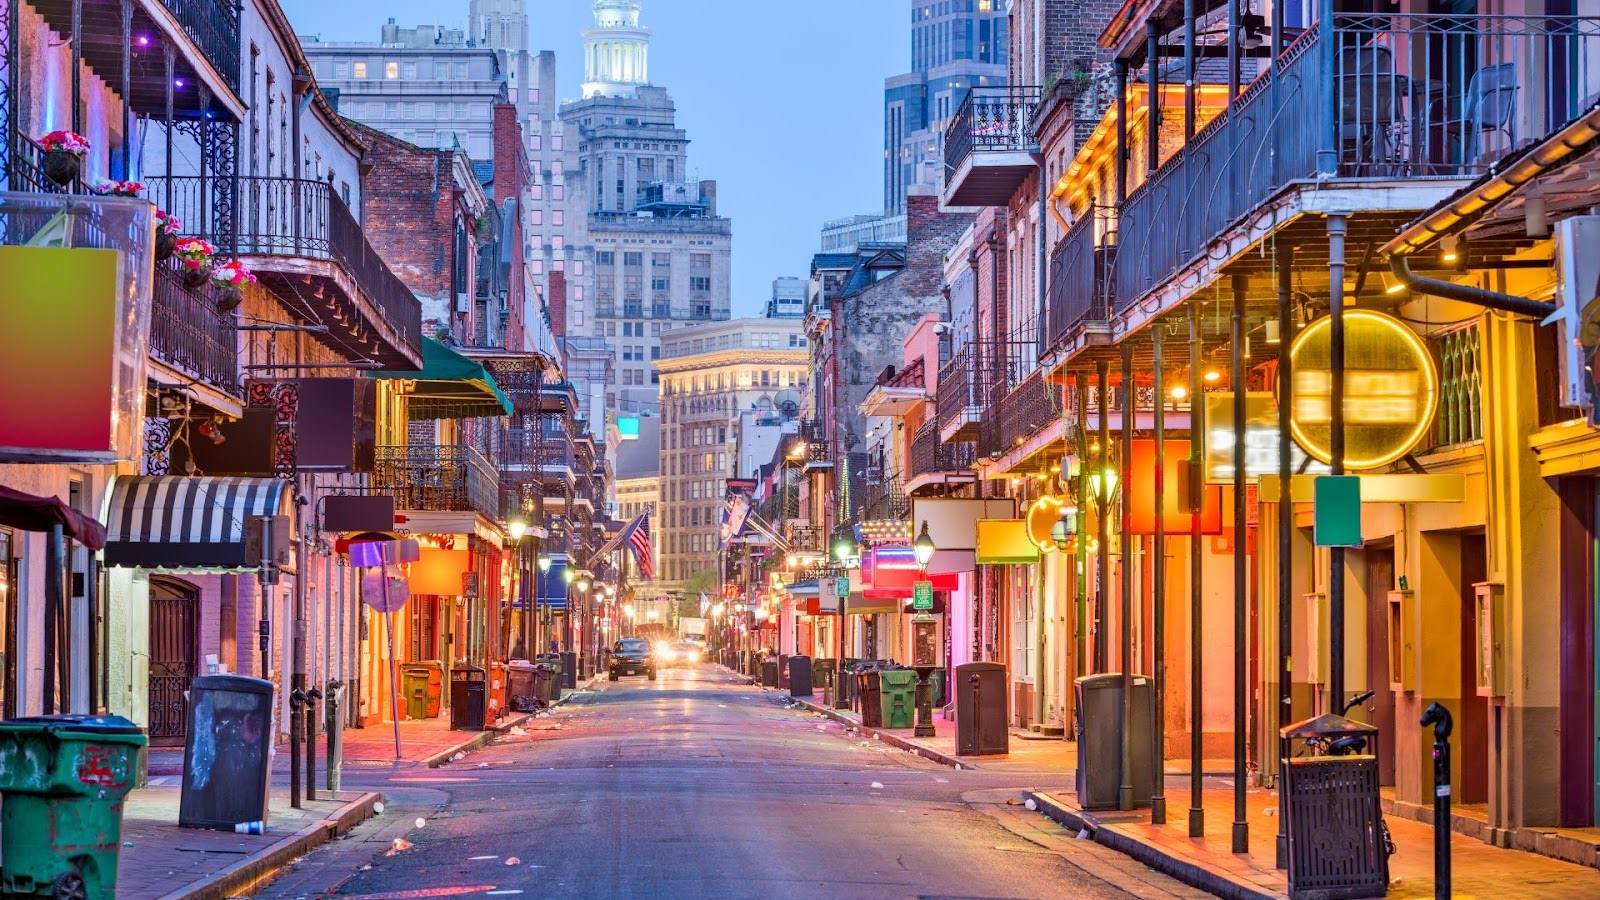 Best Vacation Spots for Couples - New Orleans